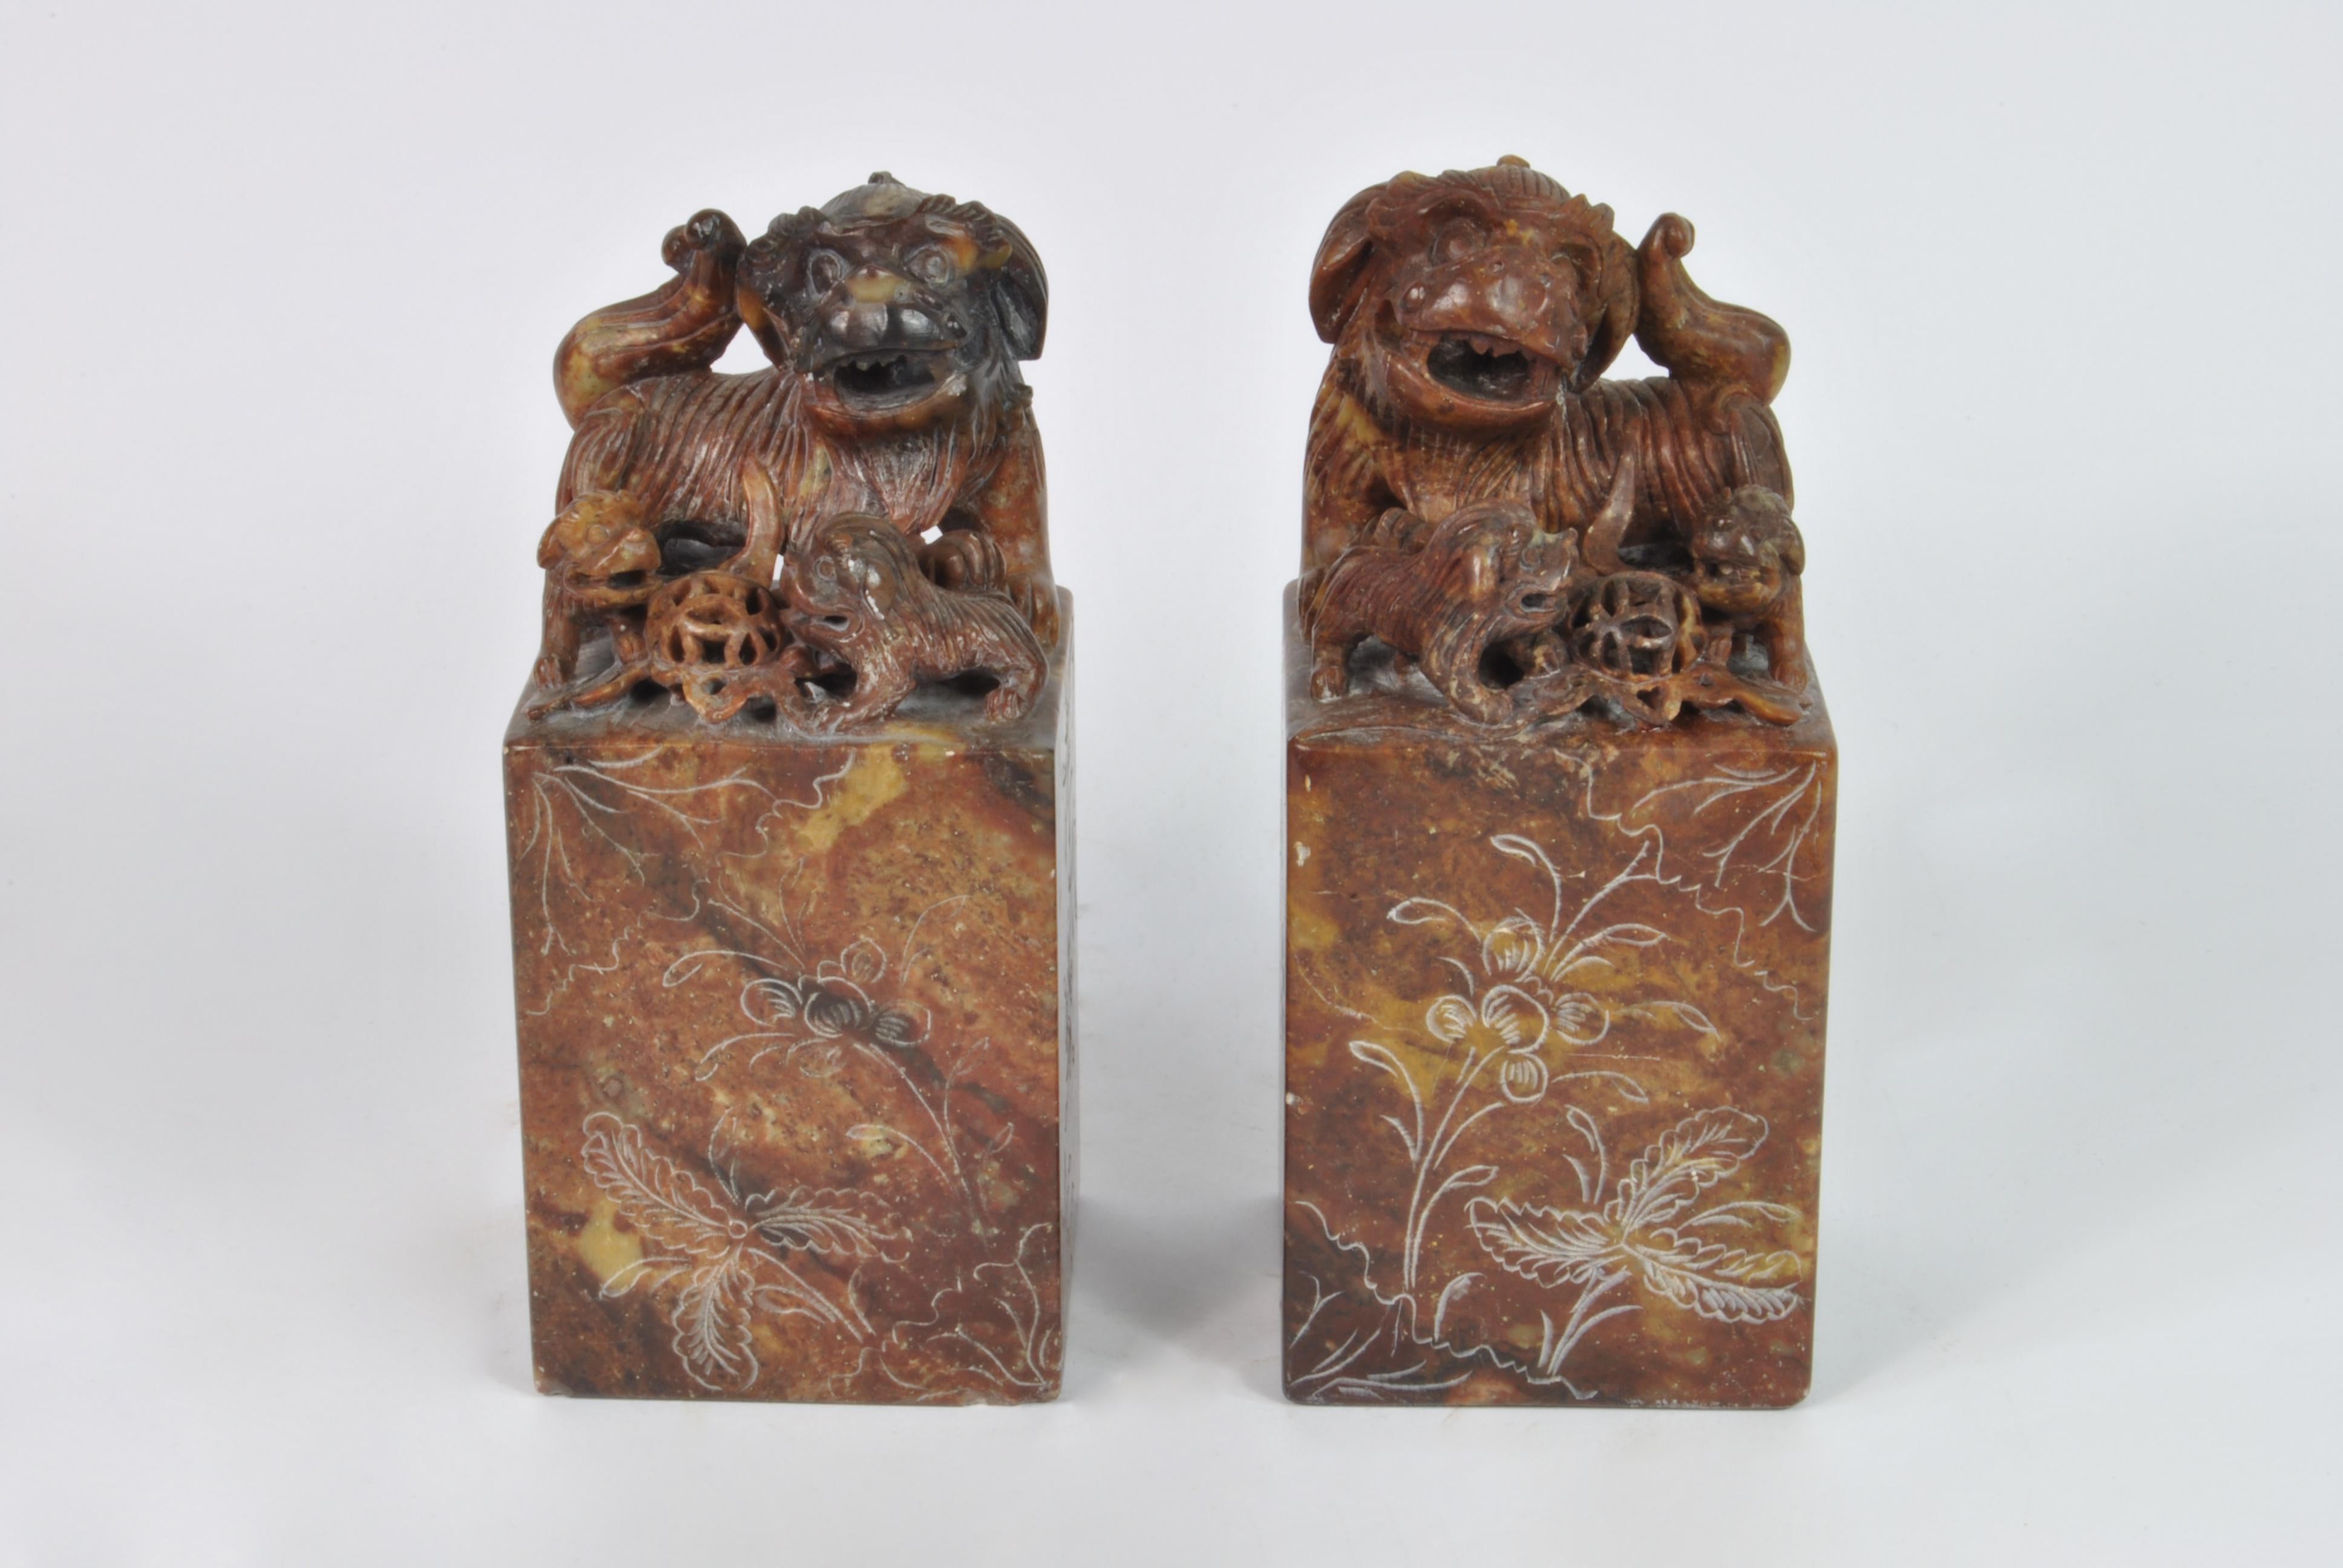 Pair of Pho dog-shaped hard stone bookends.
The 